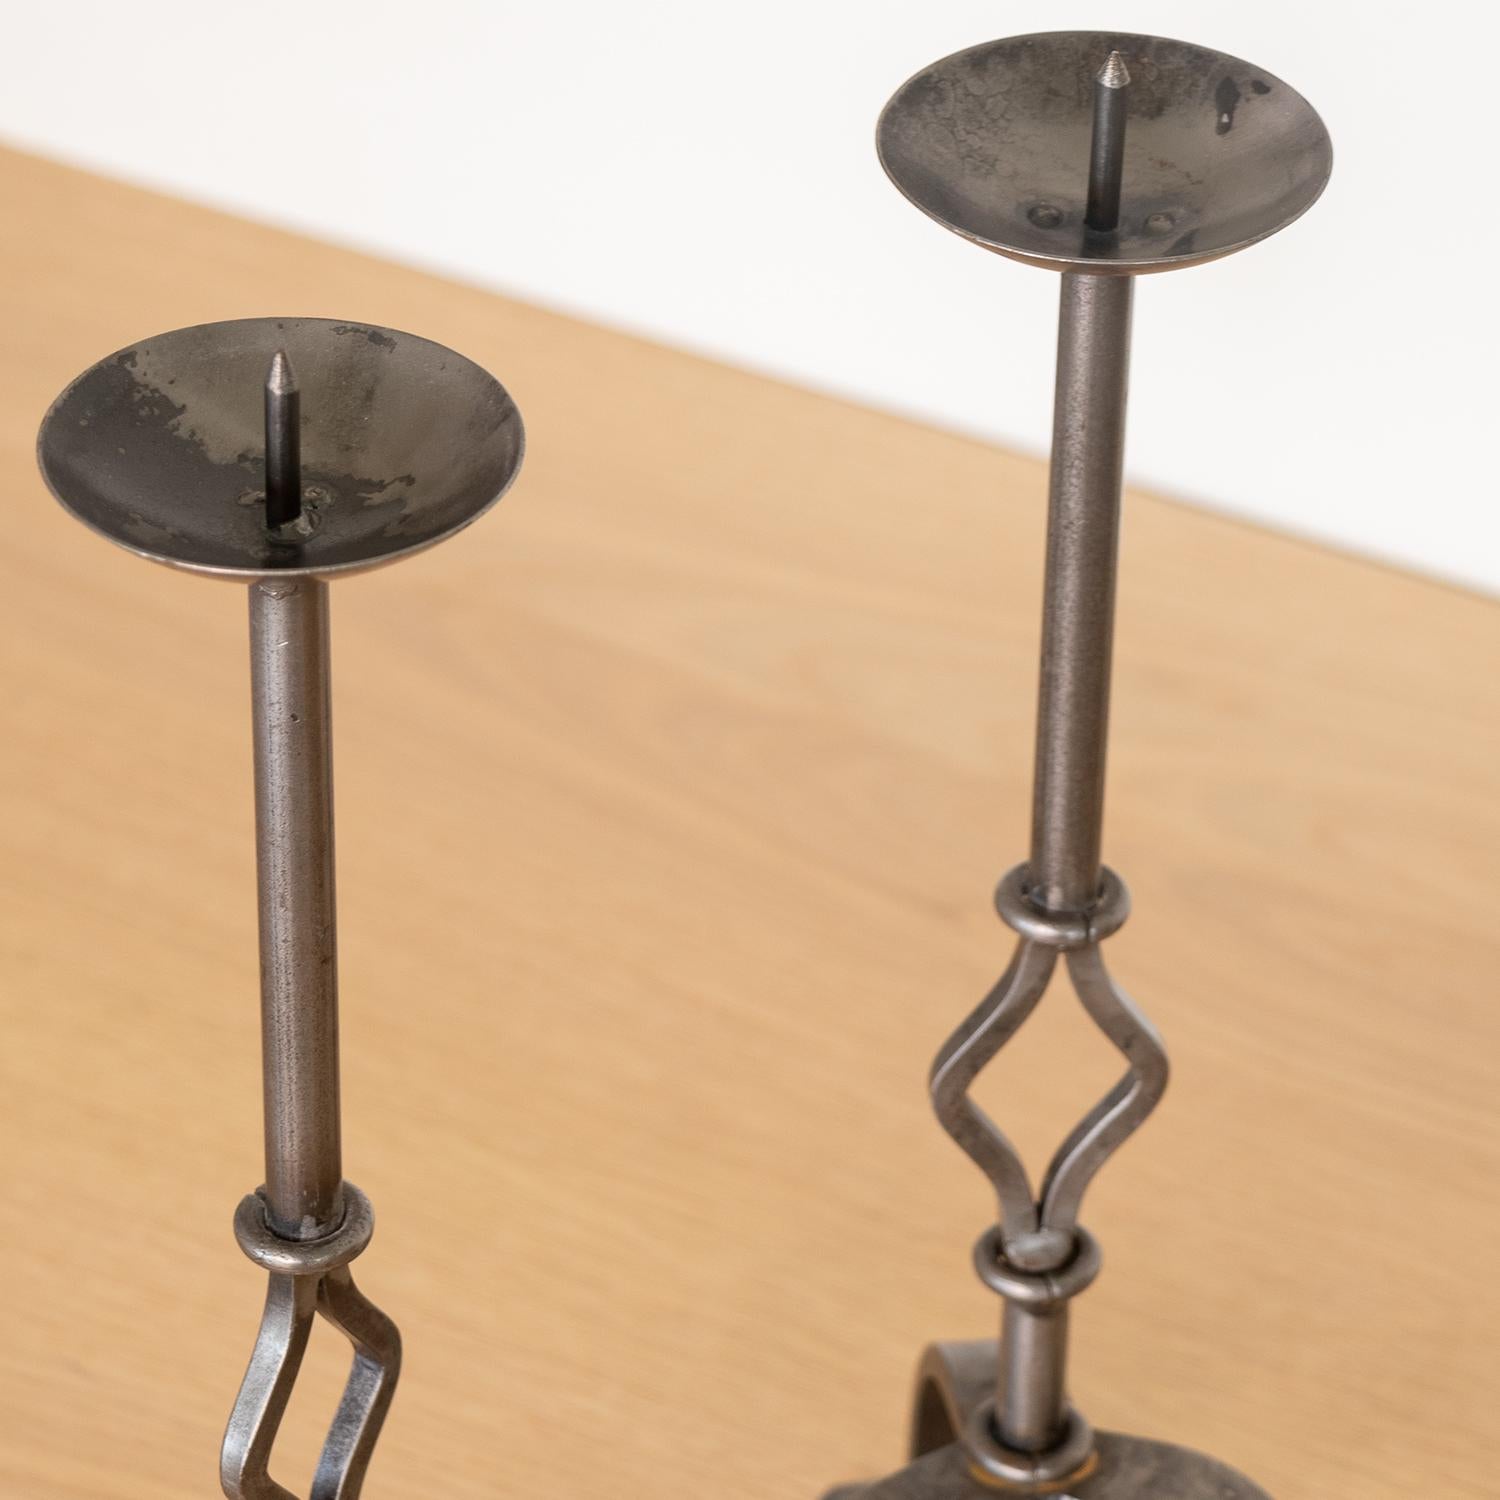 Pair of French Iron Candlesticks For Sale 1